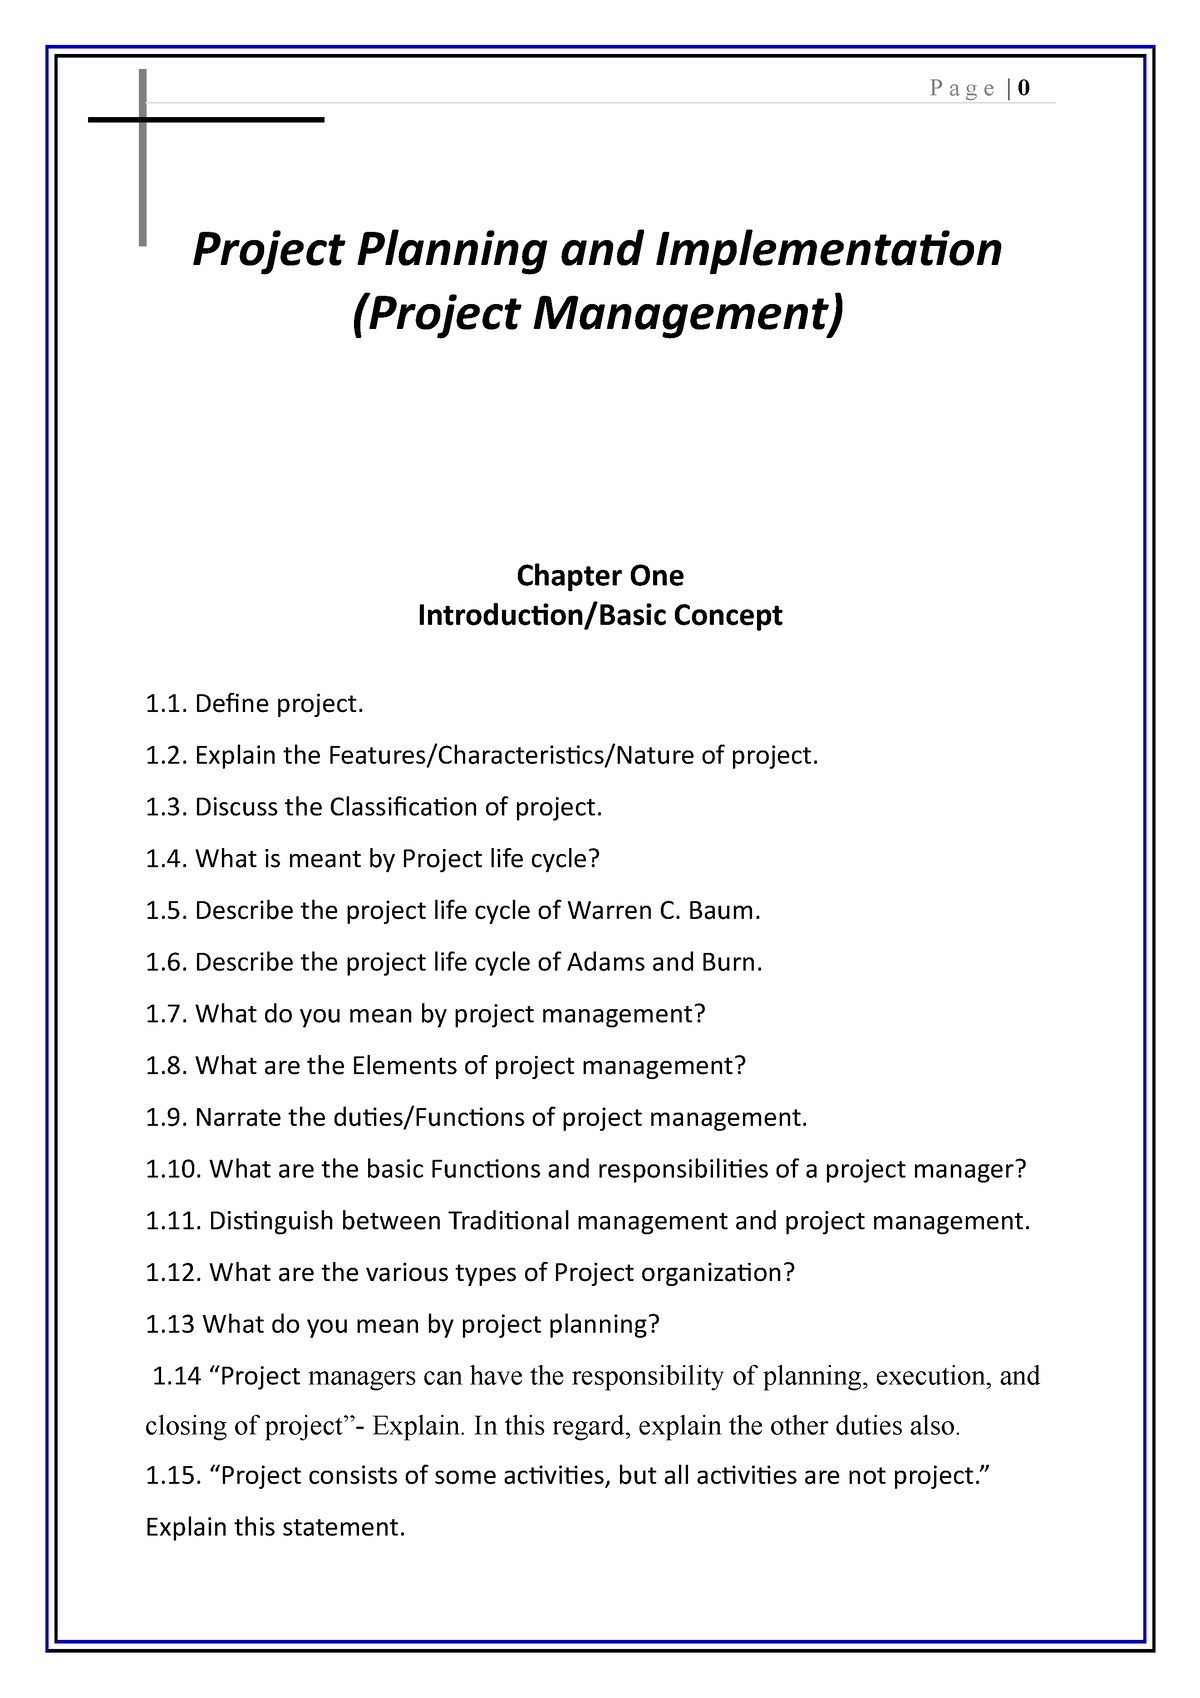 Project management - Prepared for BBA - Project Planning and ...